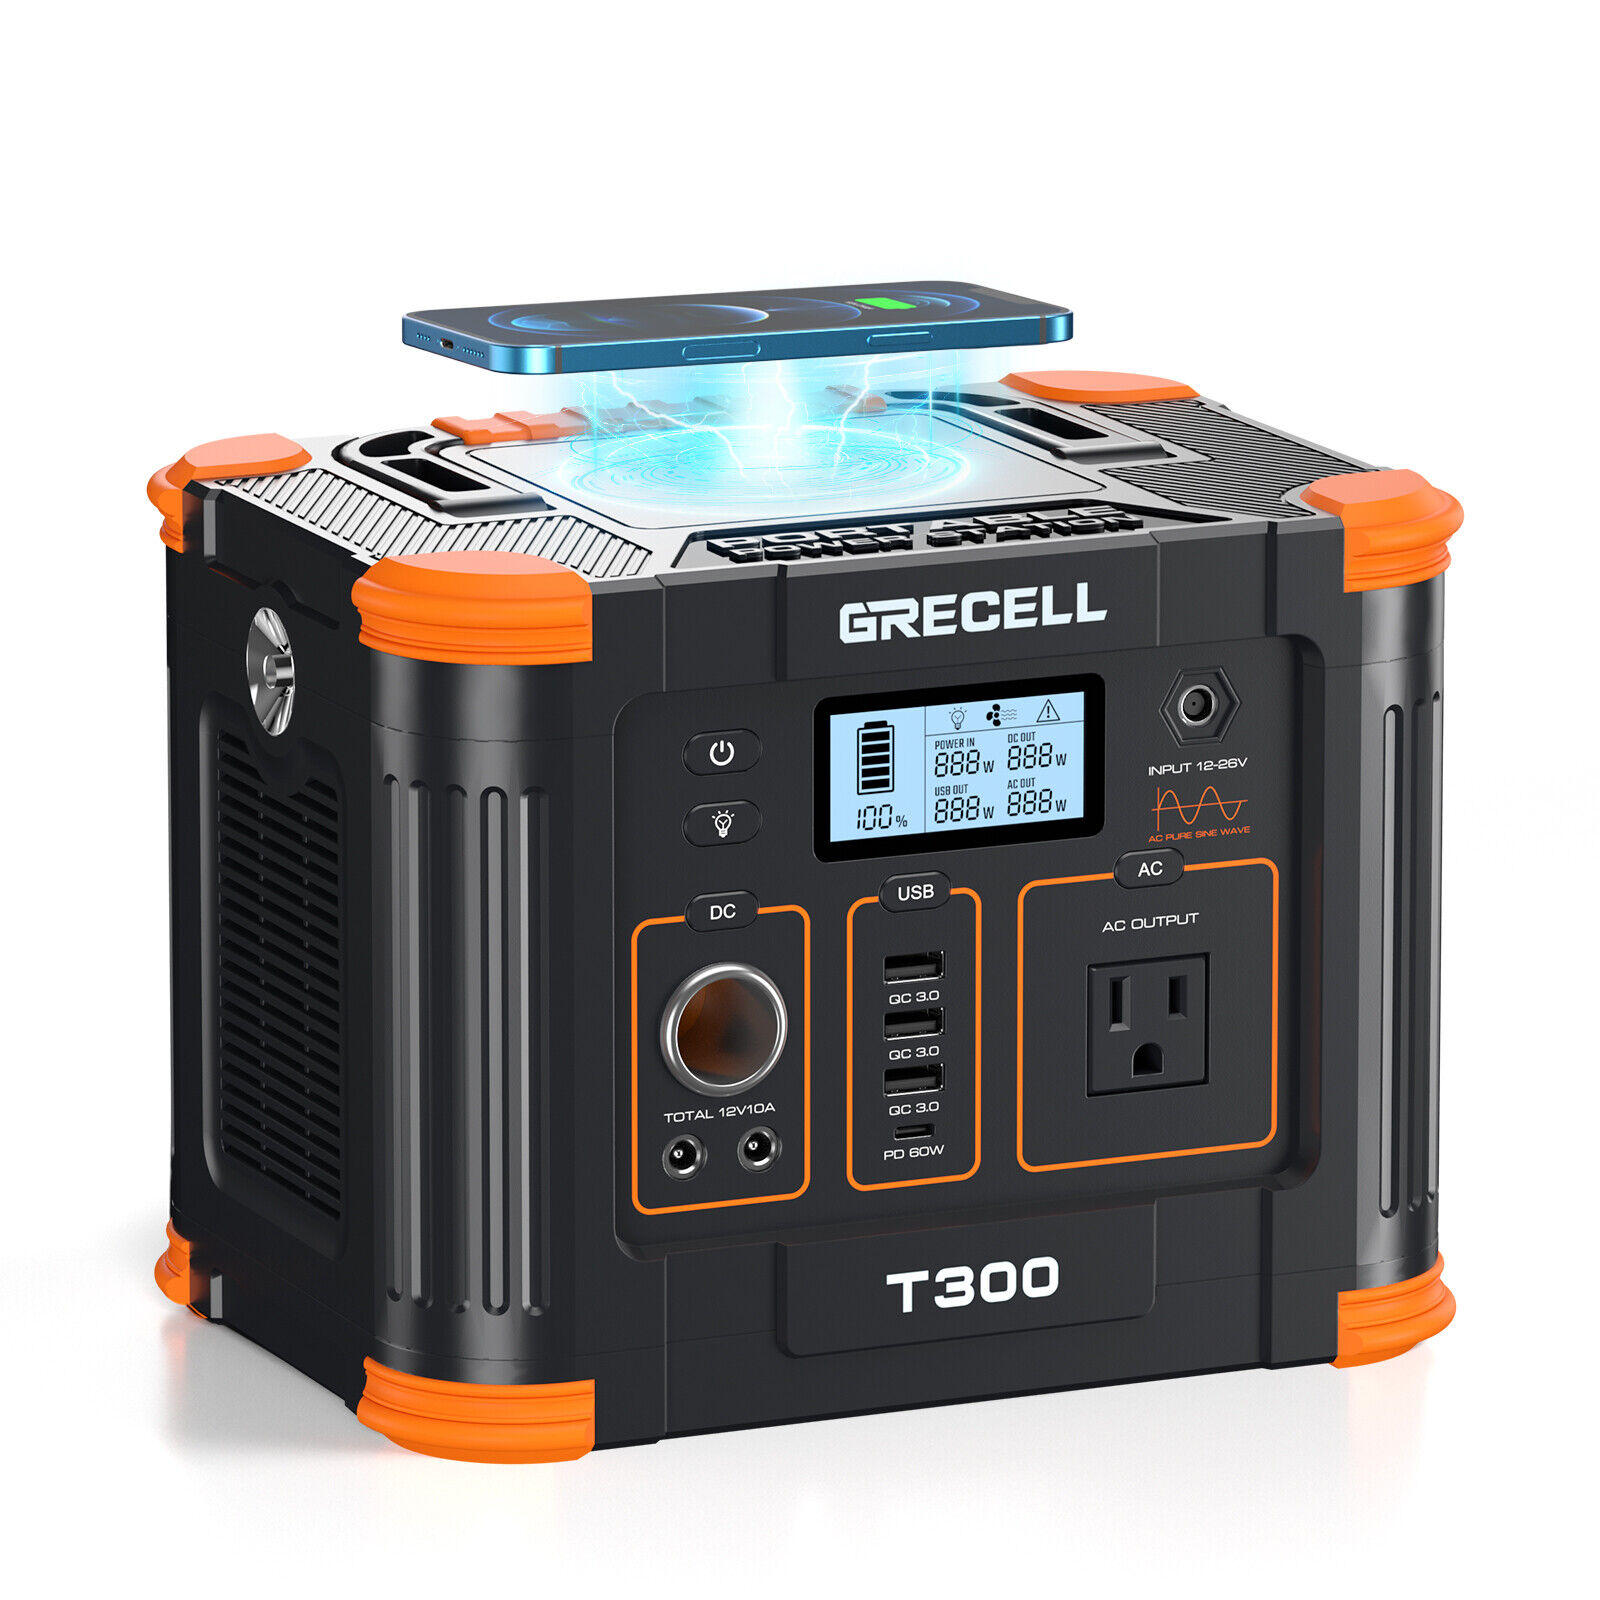 GRECELL Portable Power Station Pure Sine Wave Solar Generator Backup Battery